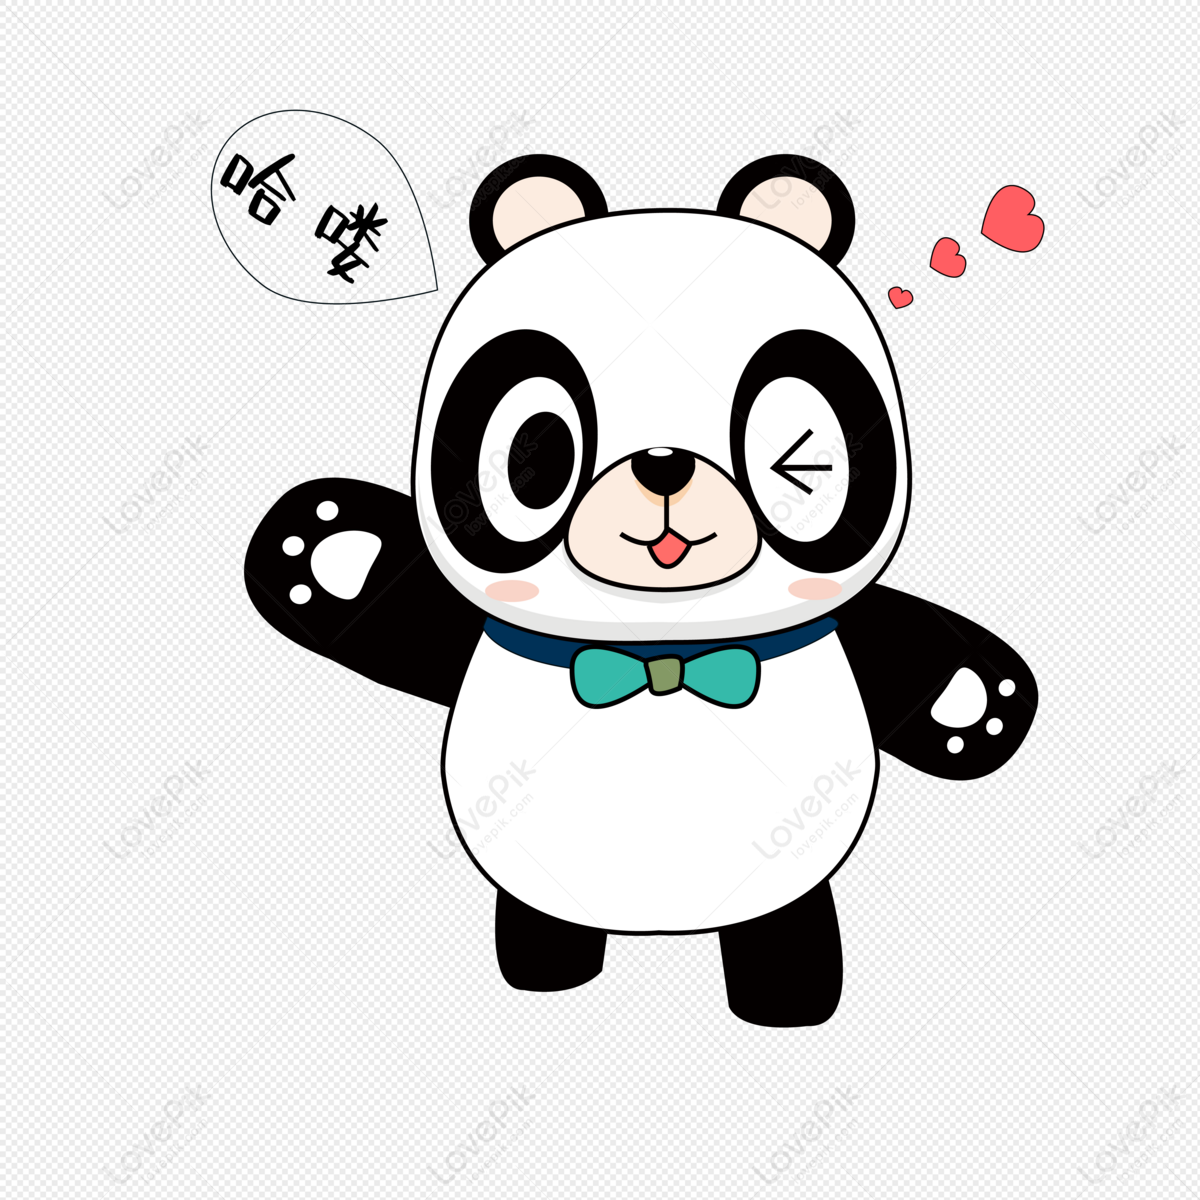 Hello Panda Emoticon Pack PNG Transparent Image And Clipart Image For ...